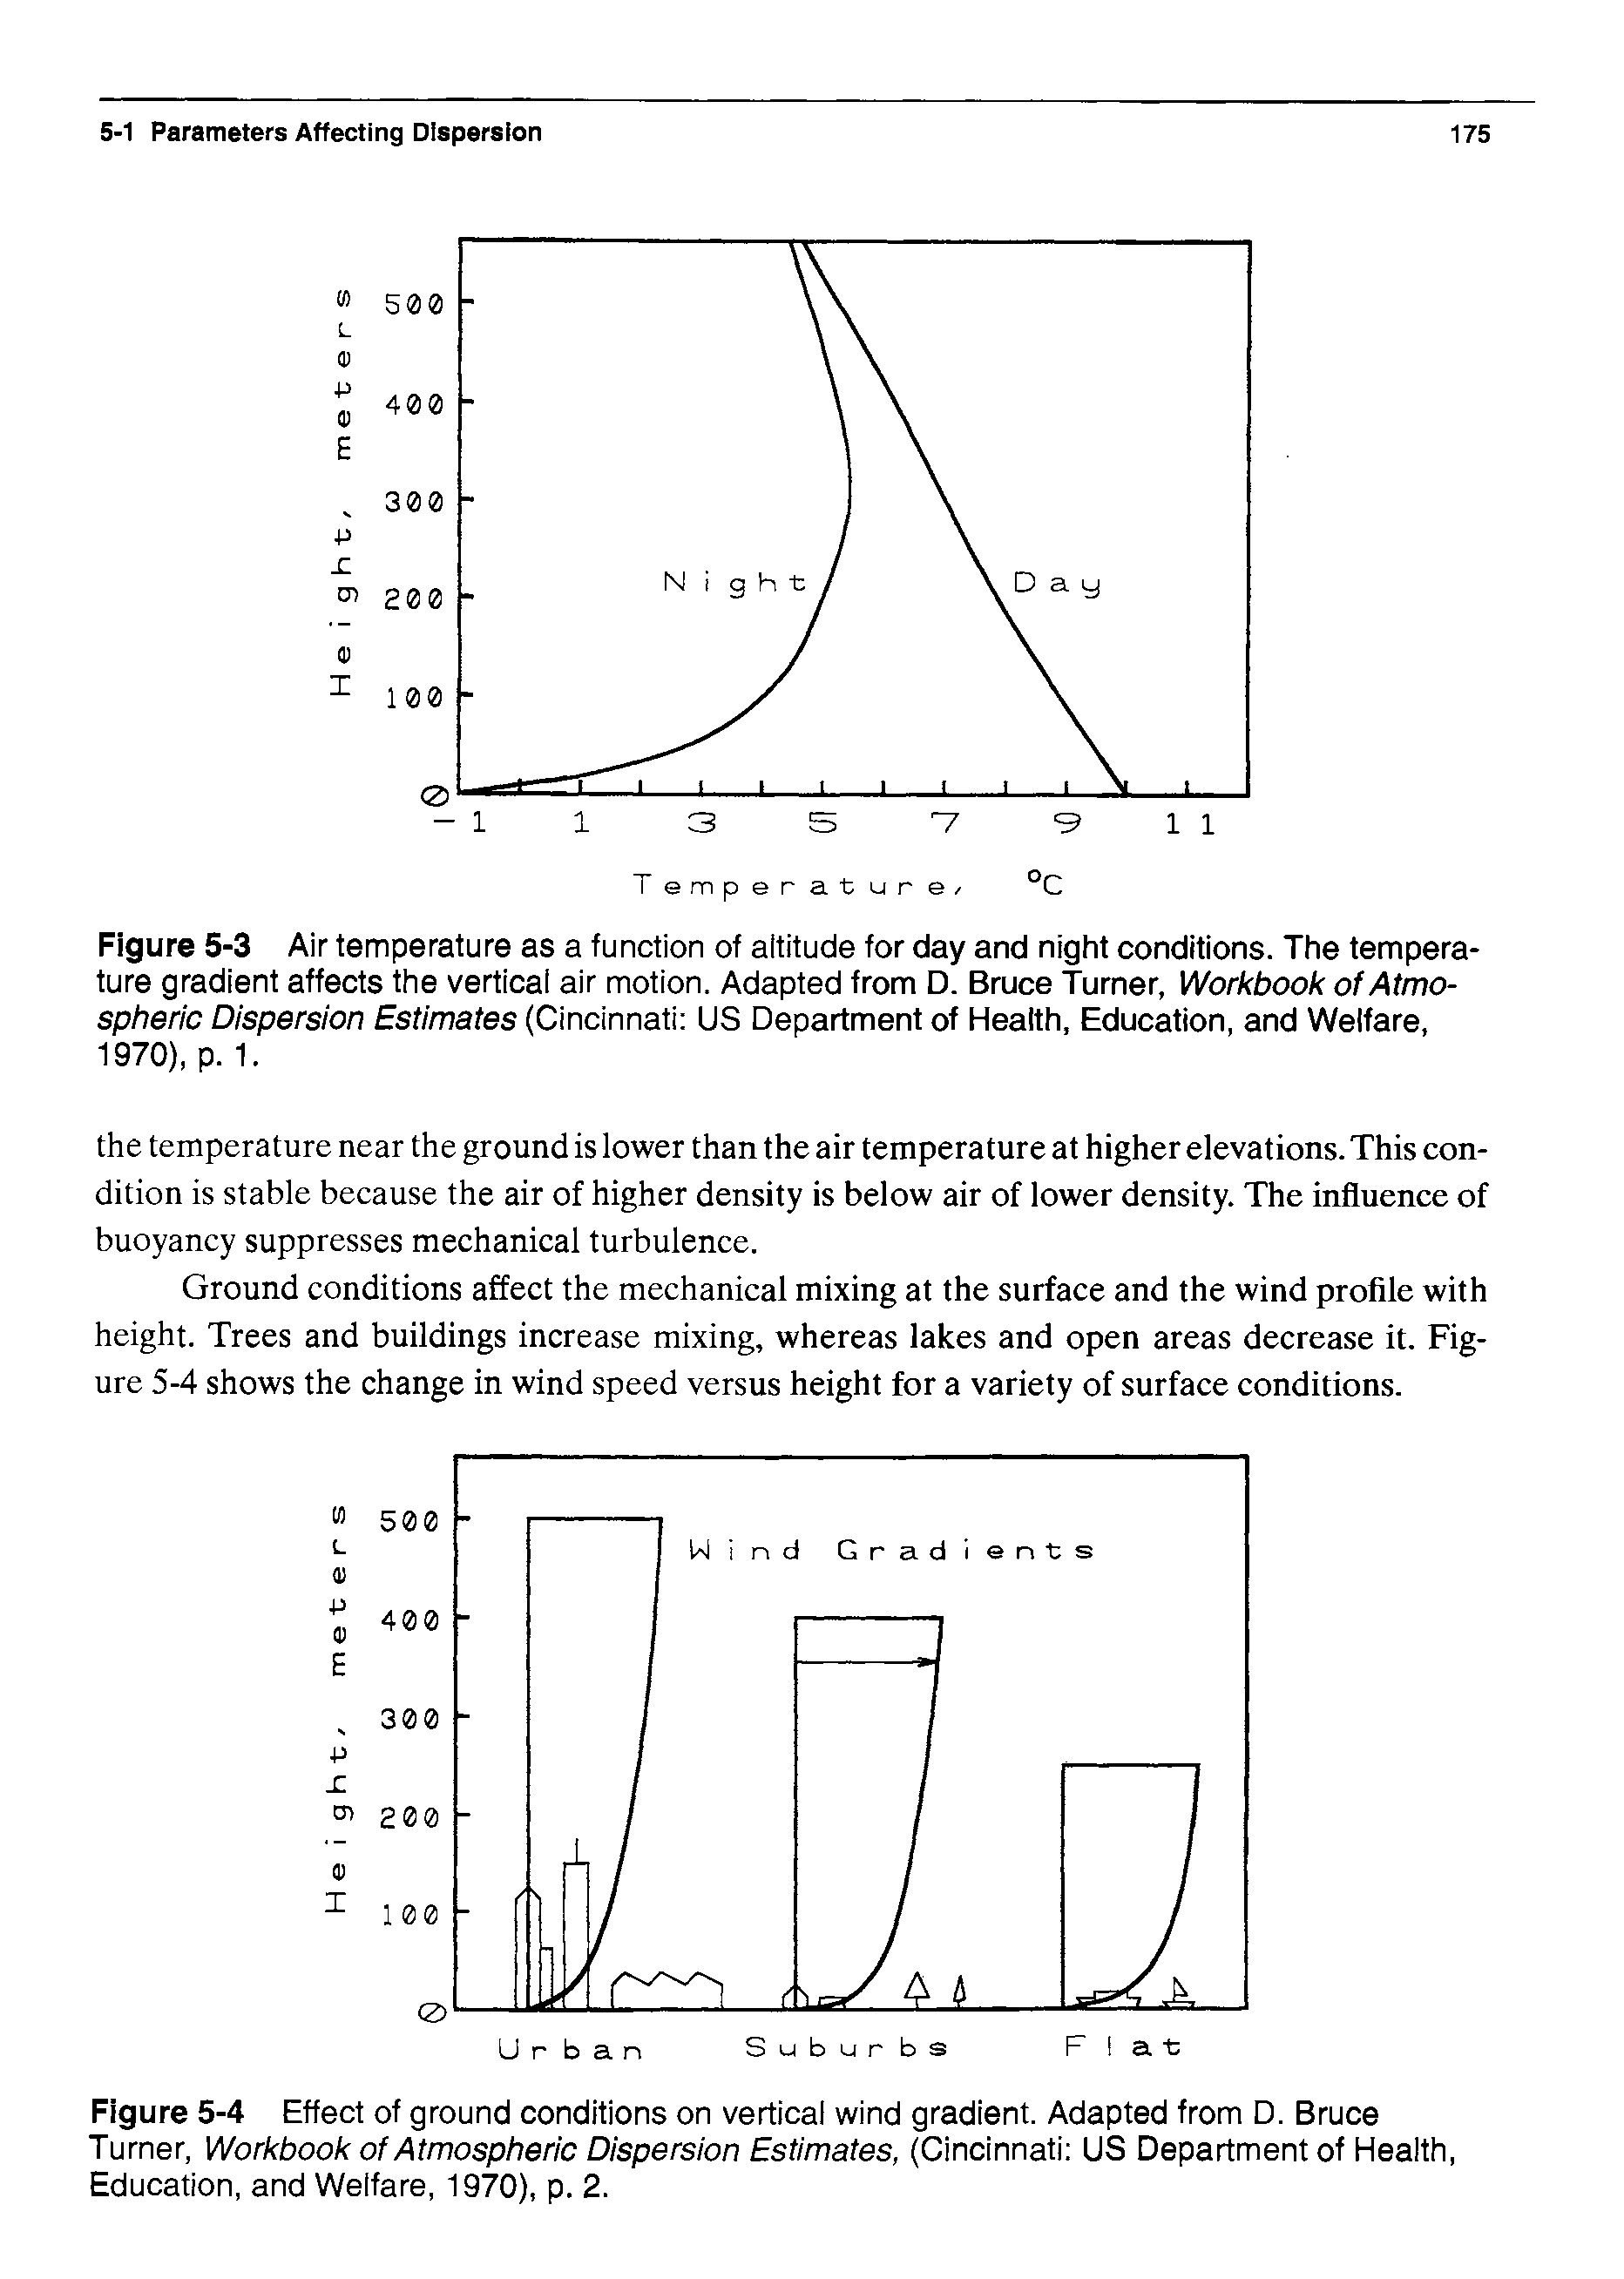 Figure 5-4 Effect of ground conditions on vertical wind gradient. Adapted from D. Bruce Turner, Workbook of Atmospheric Dispersion Estimates, (Cincinnati US Department of Health, Education, and Welfare, 1970), p. 2.